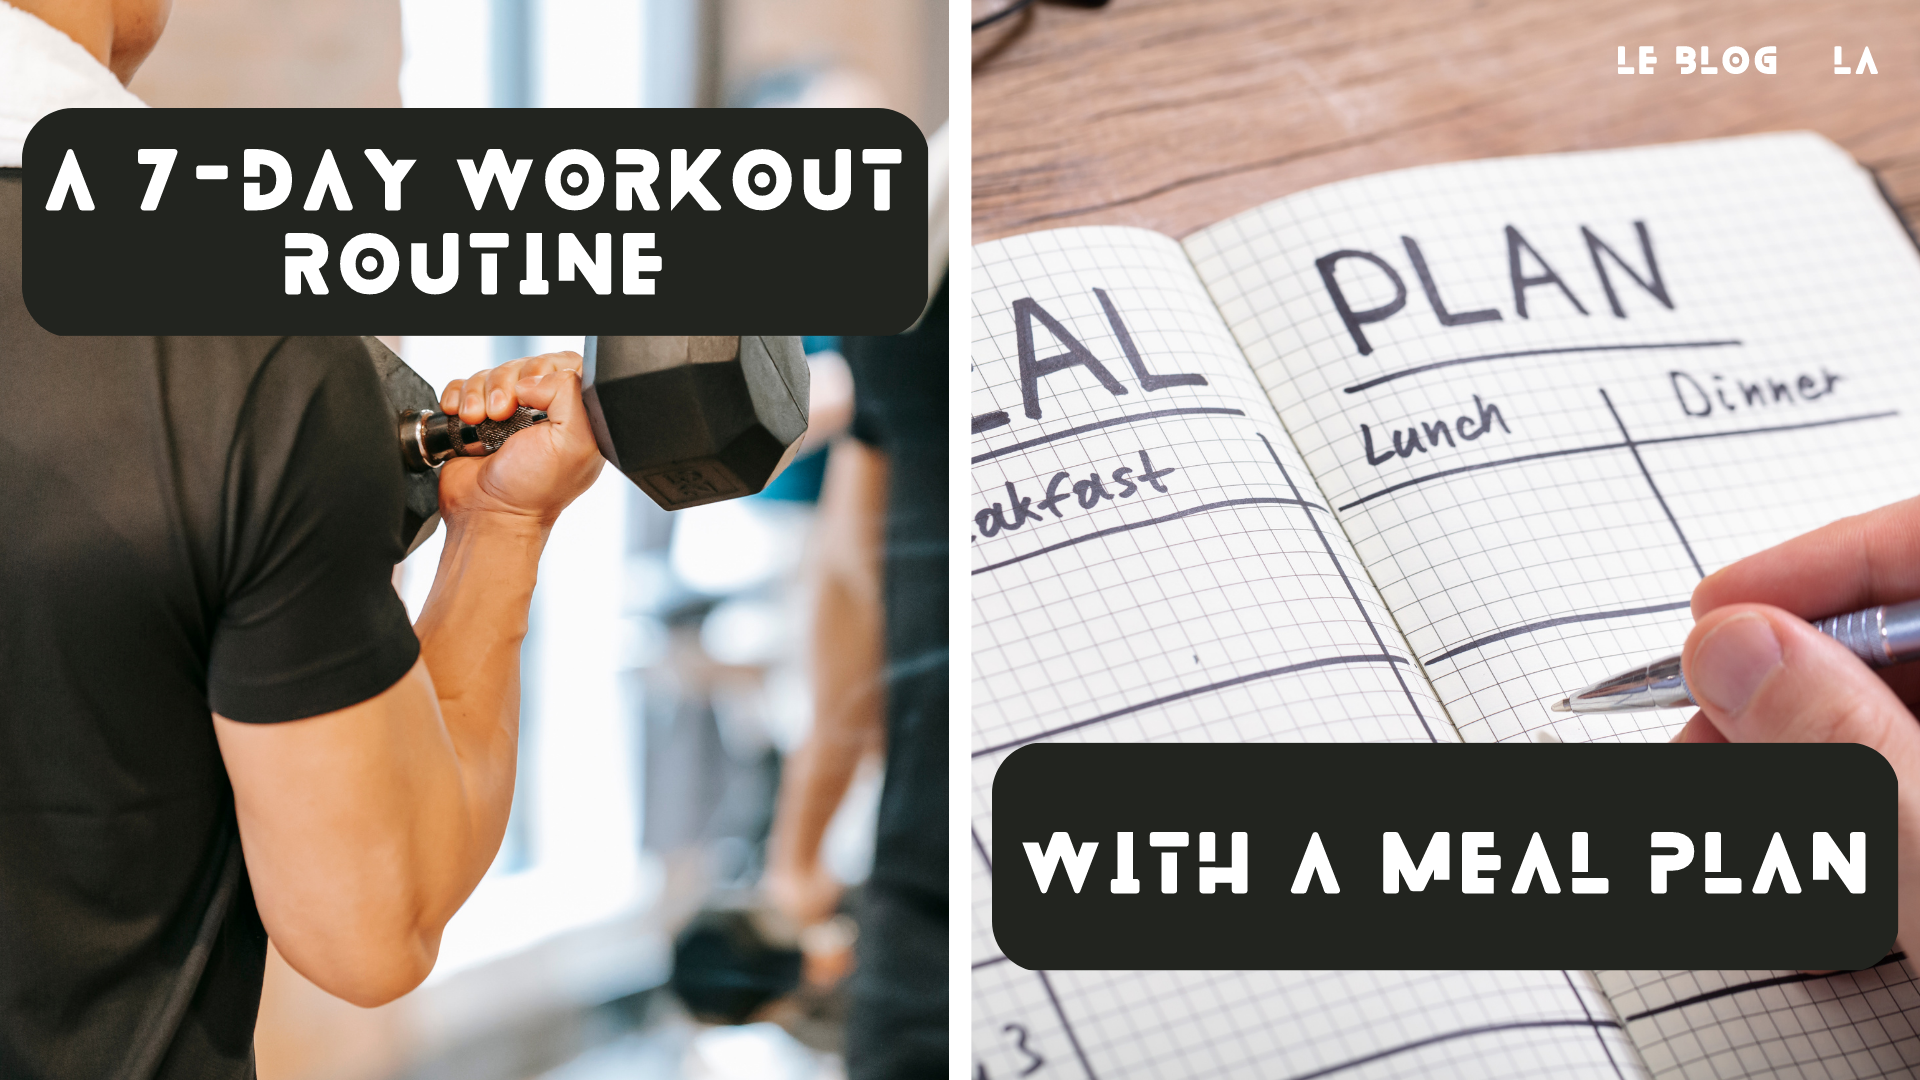 My Original 7-Day Workout Routine with a Meal Plan